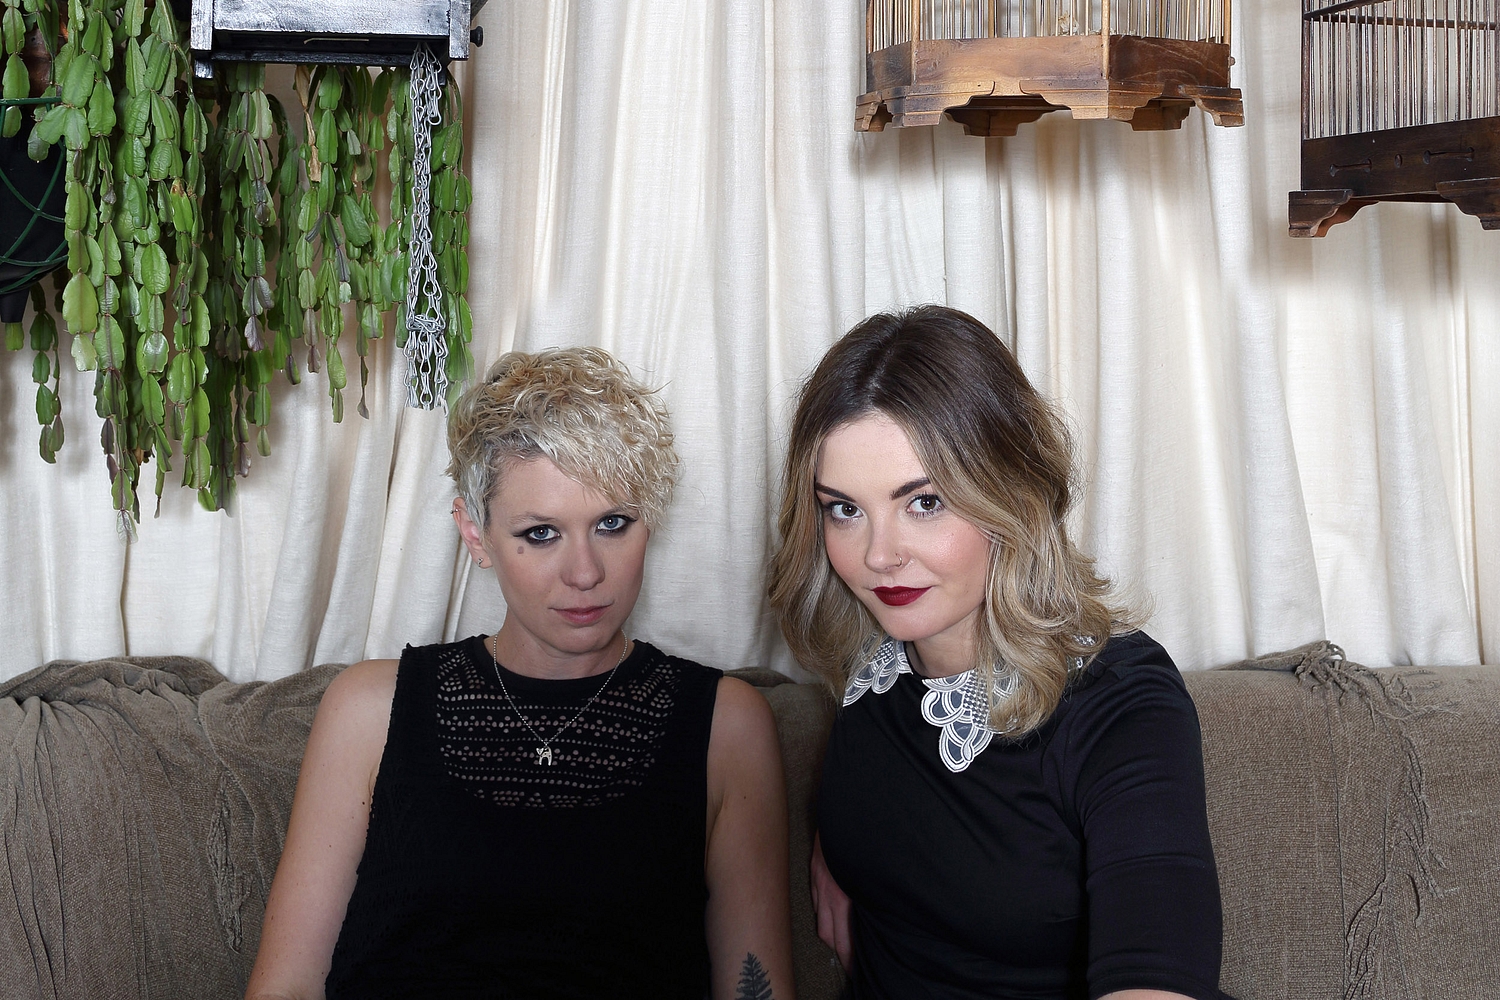 Honeyblood: Ready for the magic